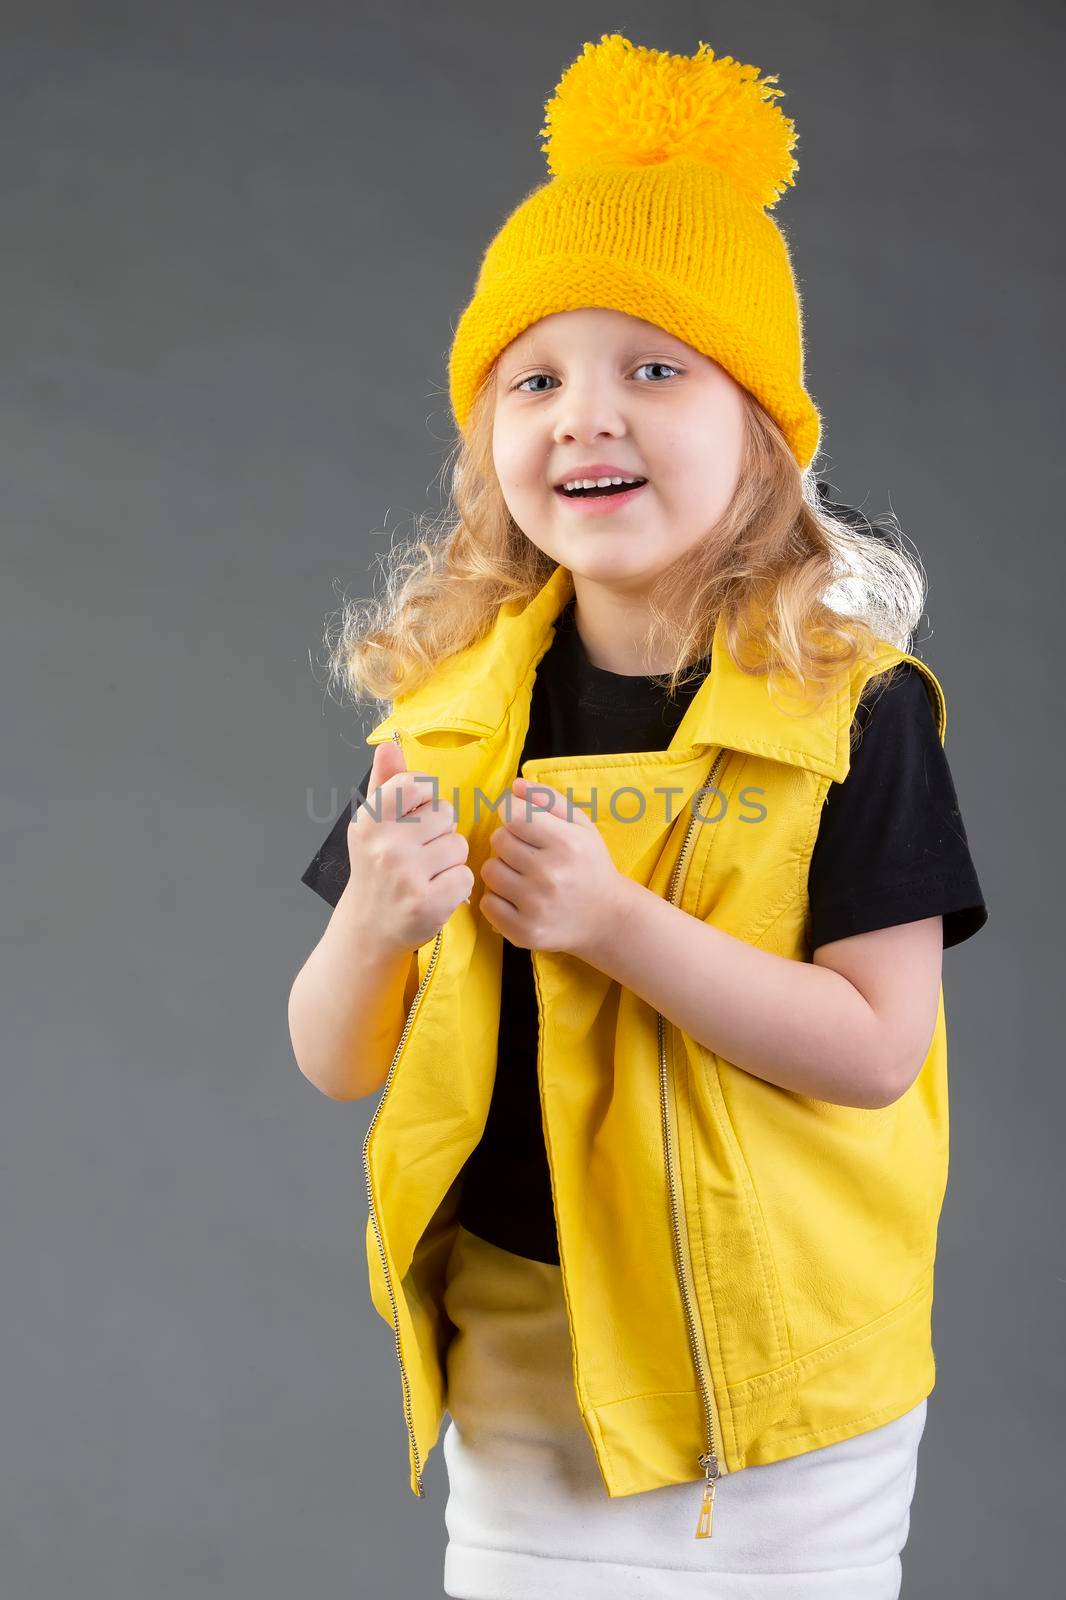 Beautiful little blonde girl in a yellow knitted hat on a gray background. Five-year-old cheerful girl.